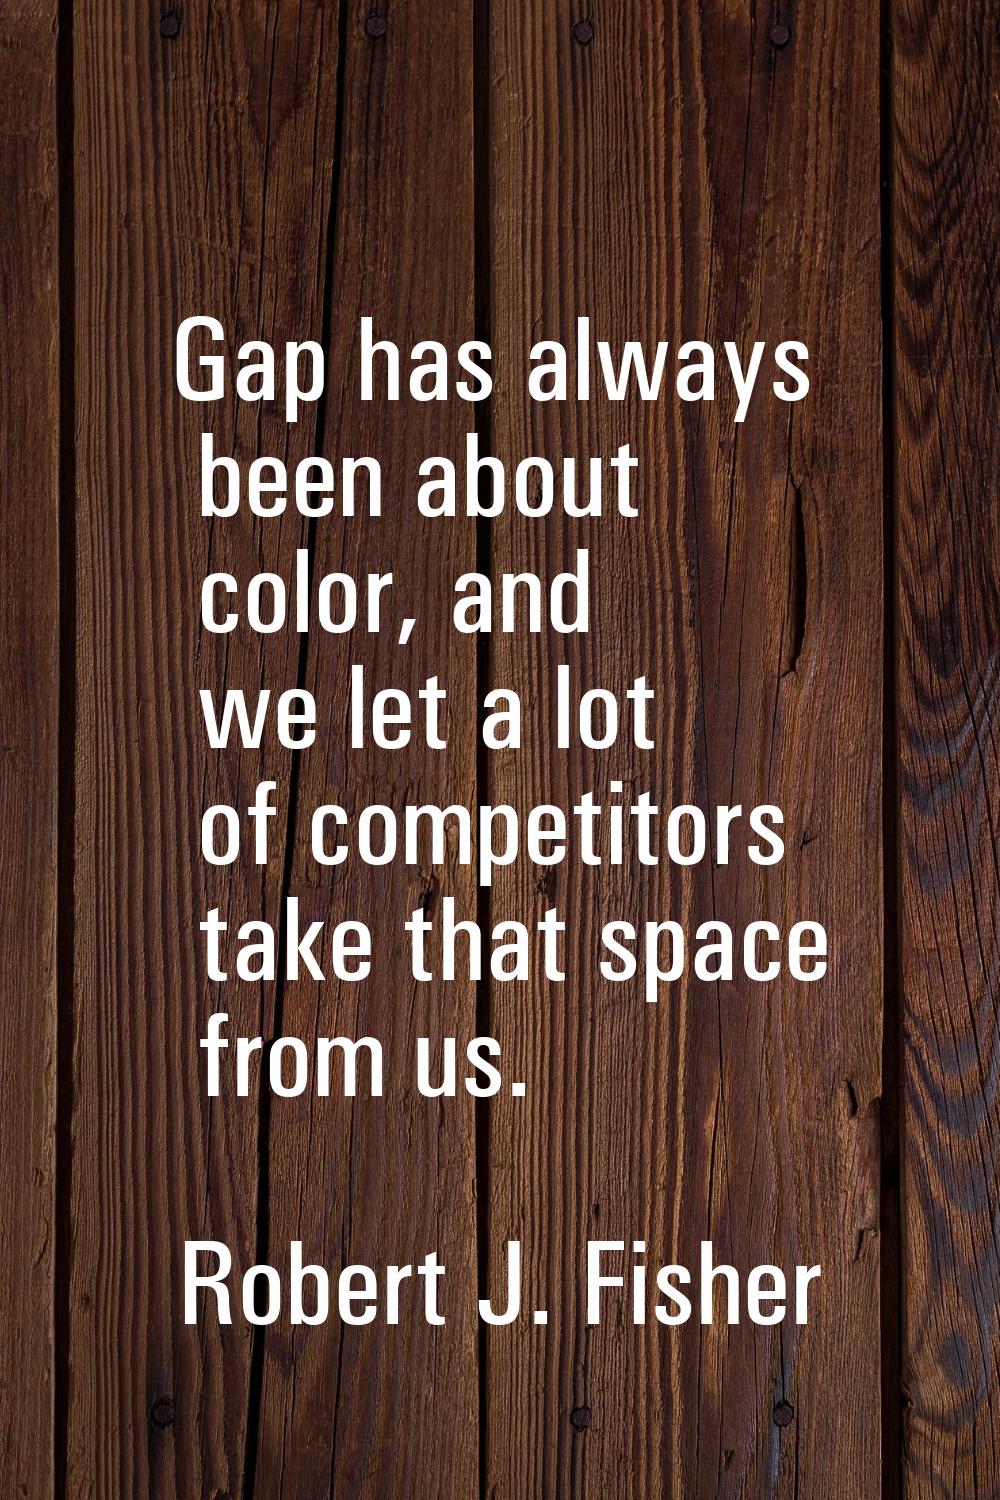 Gap has always been about color, and we let a lot of competitors take that space from us.